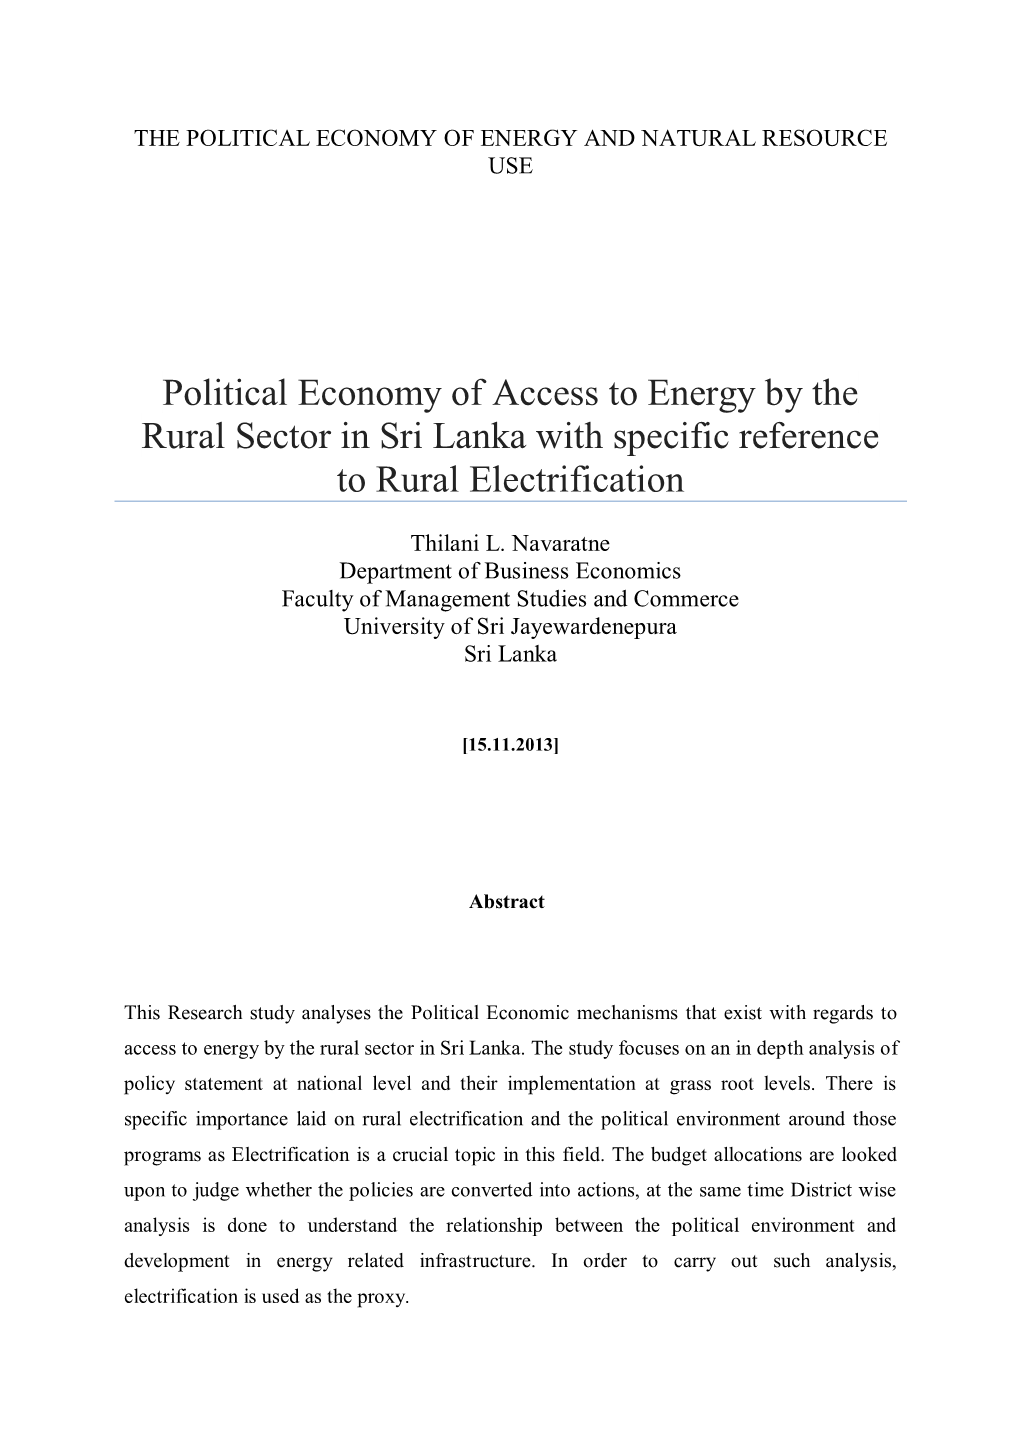 Political Economy of Access to Energy by the Rural Sector in Sri Lanka with Specific Reference to Rural Electrification